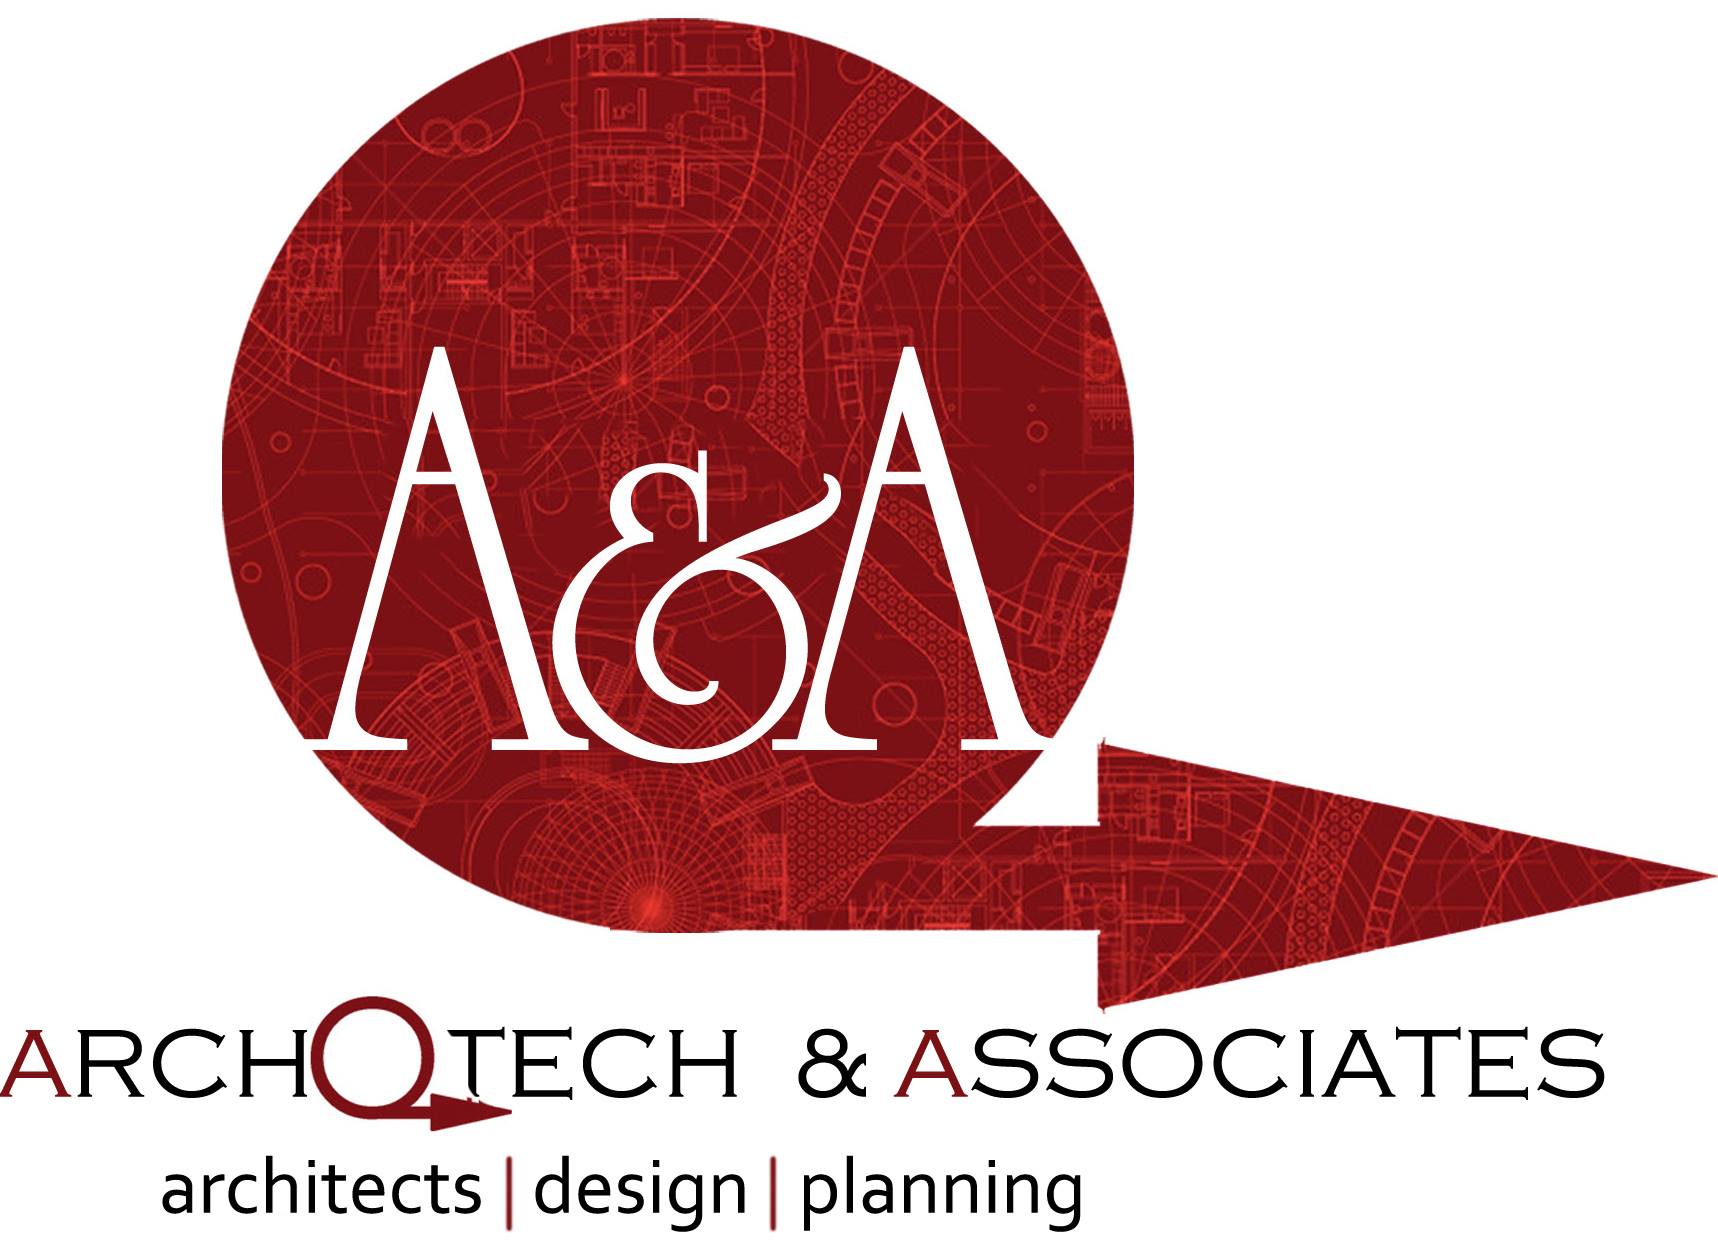 Archotech and associates (Architect)|Legal Services|Professional Services